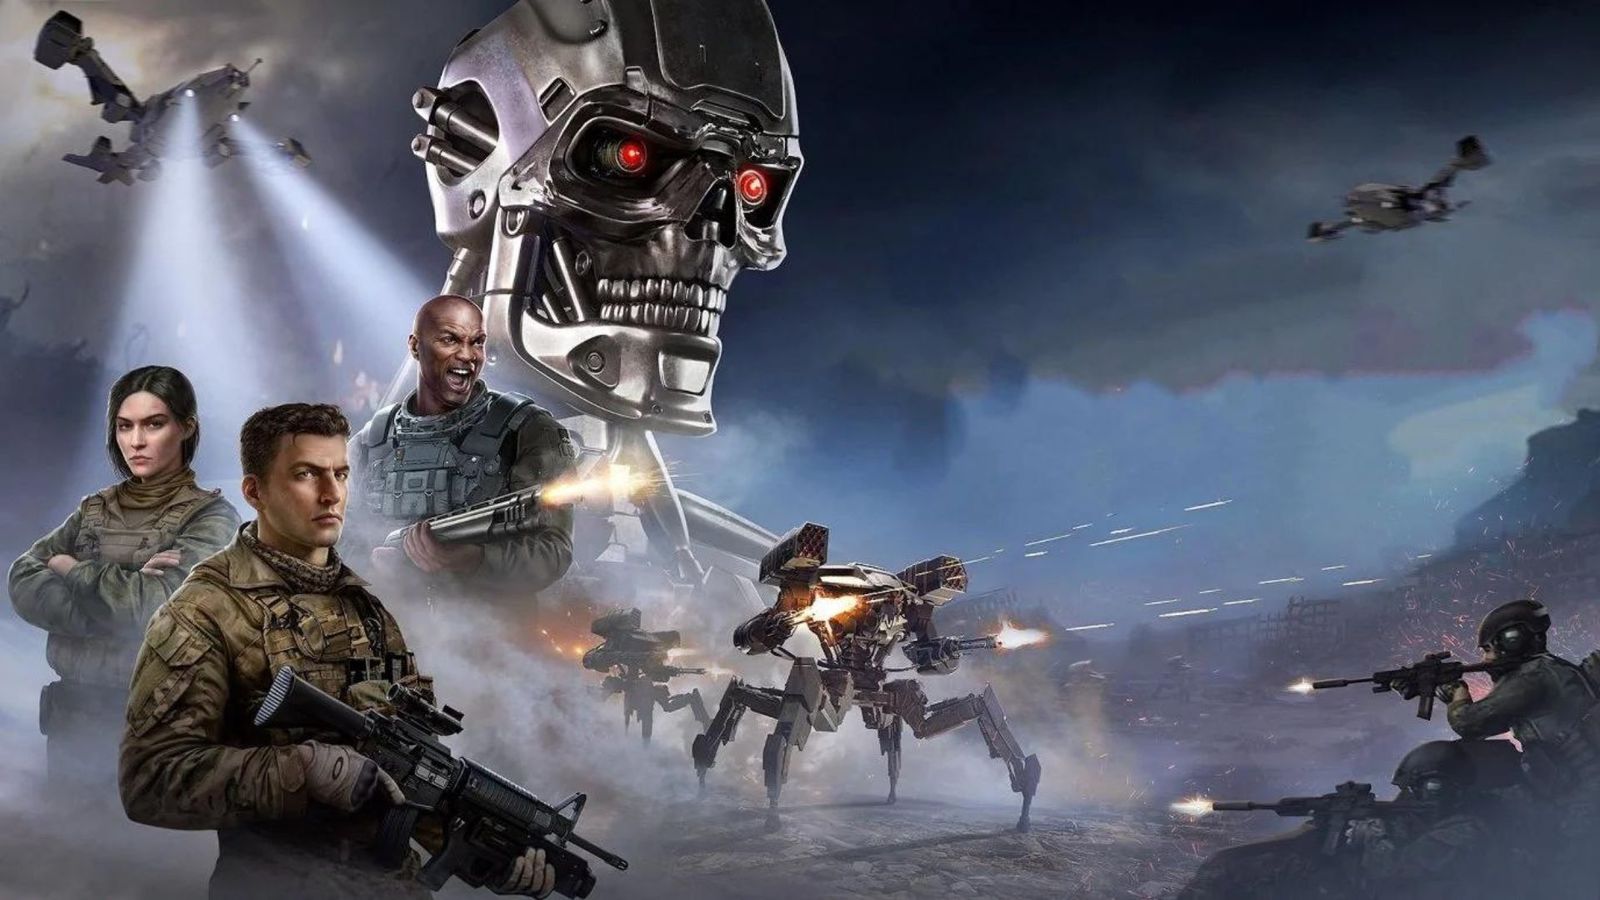 Terminator Dark Fate - Defiance key art featuring resistance soldiers and a Terminator